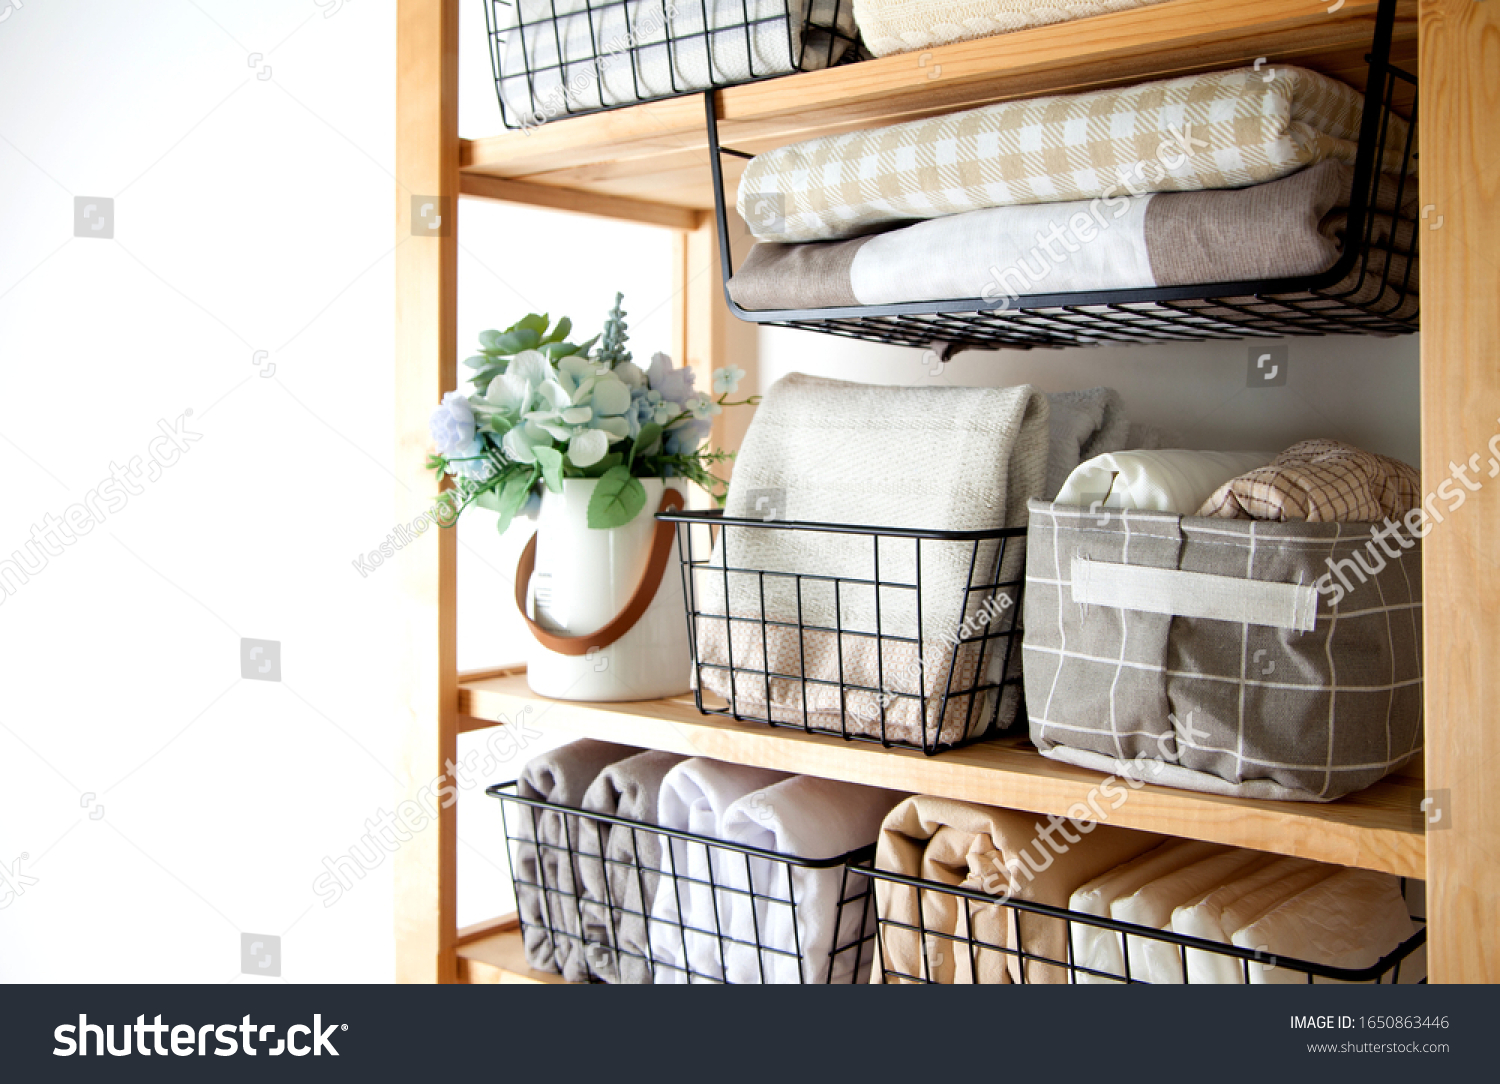 Spring cleaning of closet. Vertical tidying up storage. Neatly folded bed sheets in the metal black baskets for wardrobe. Nordic style. #1650863446